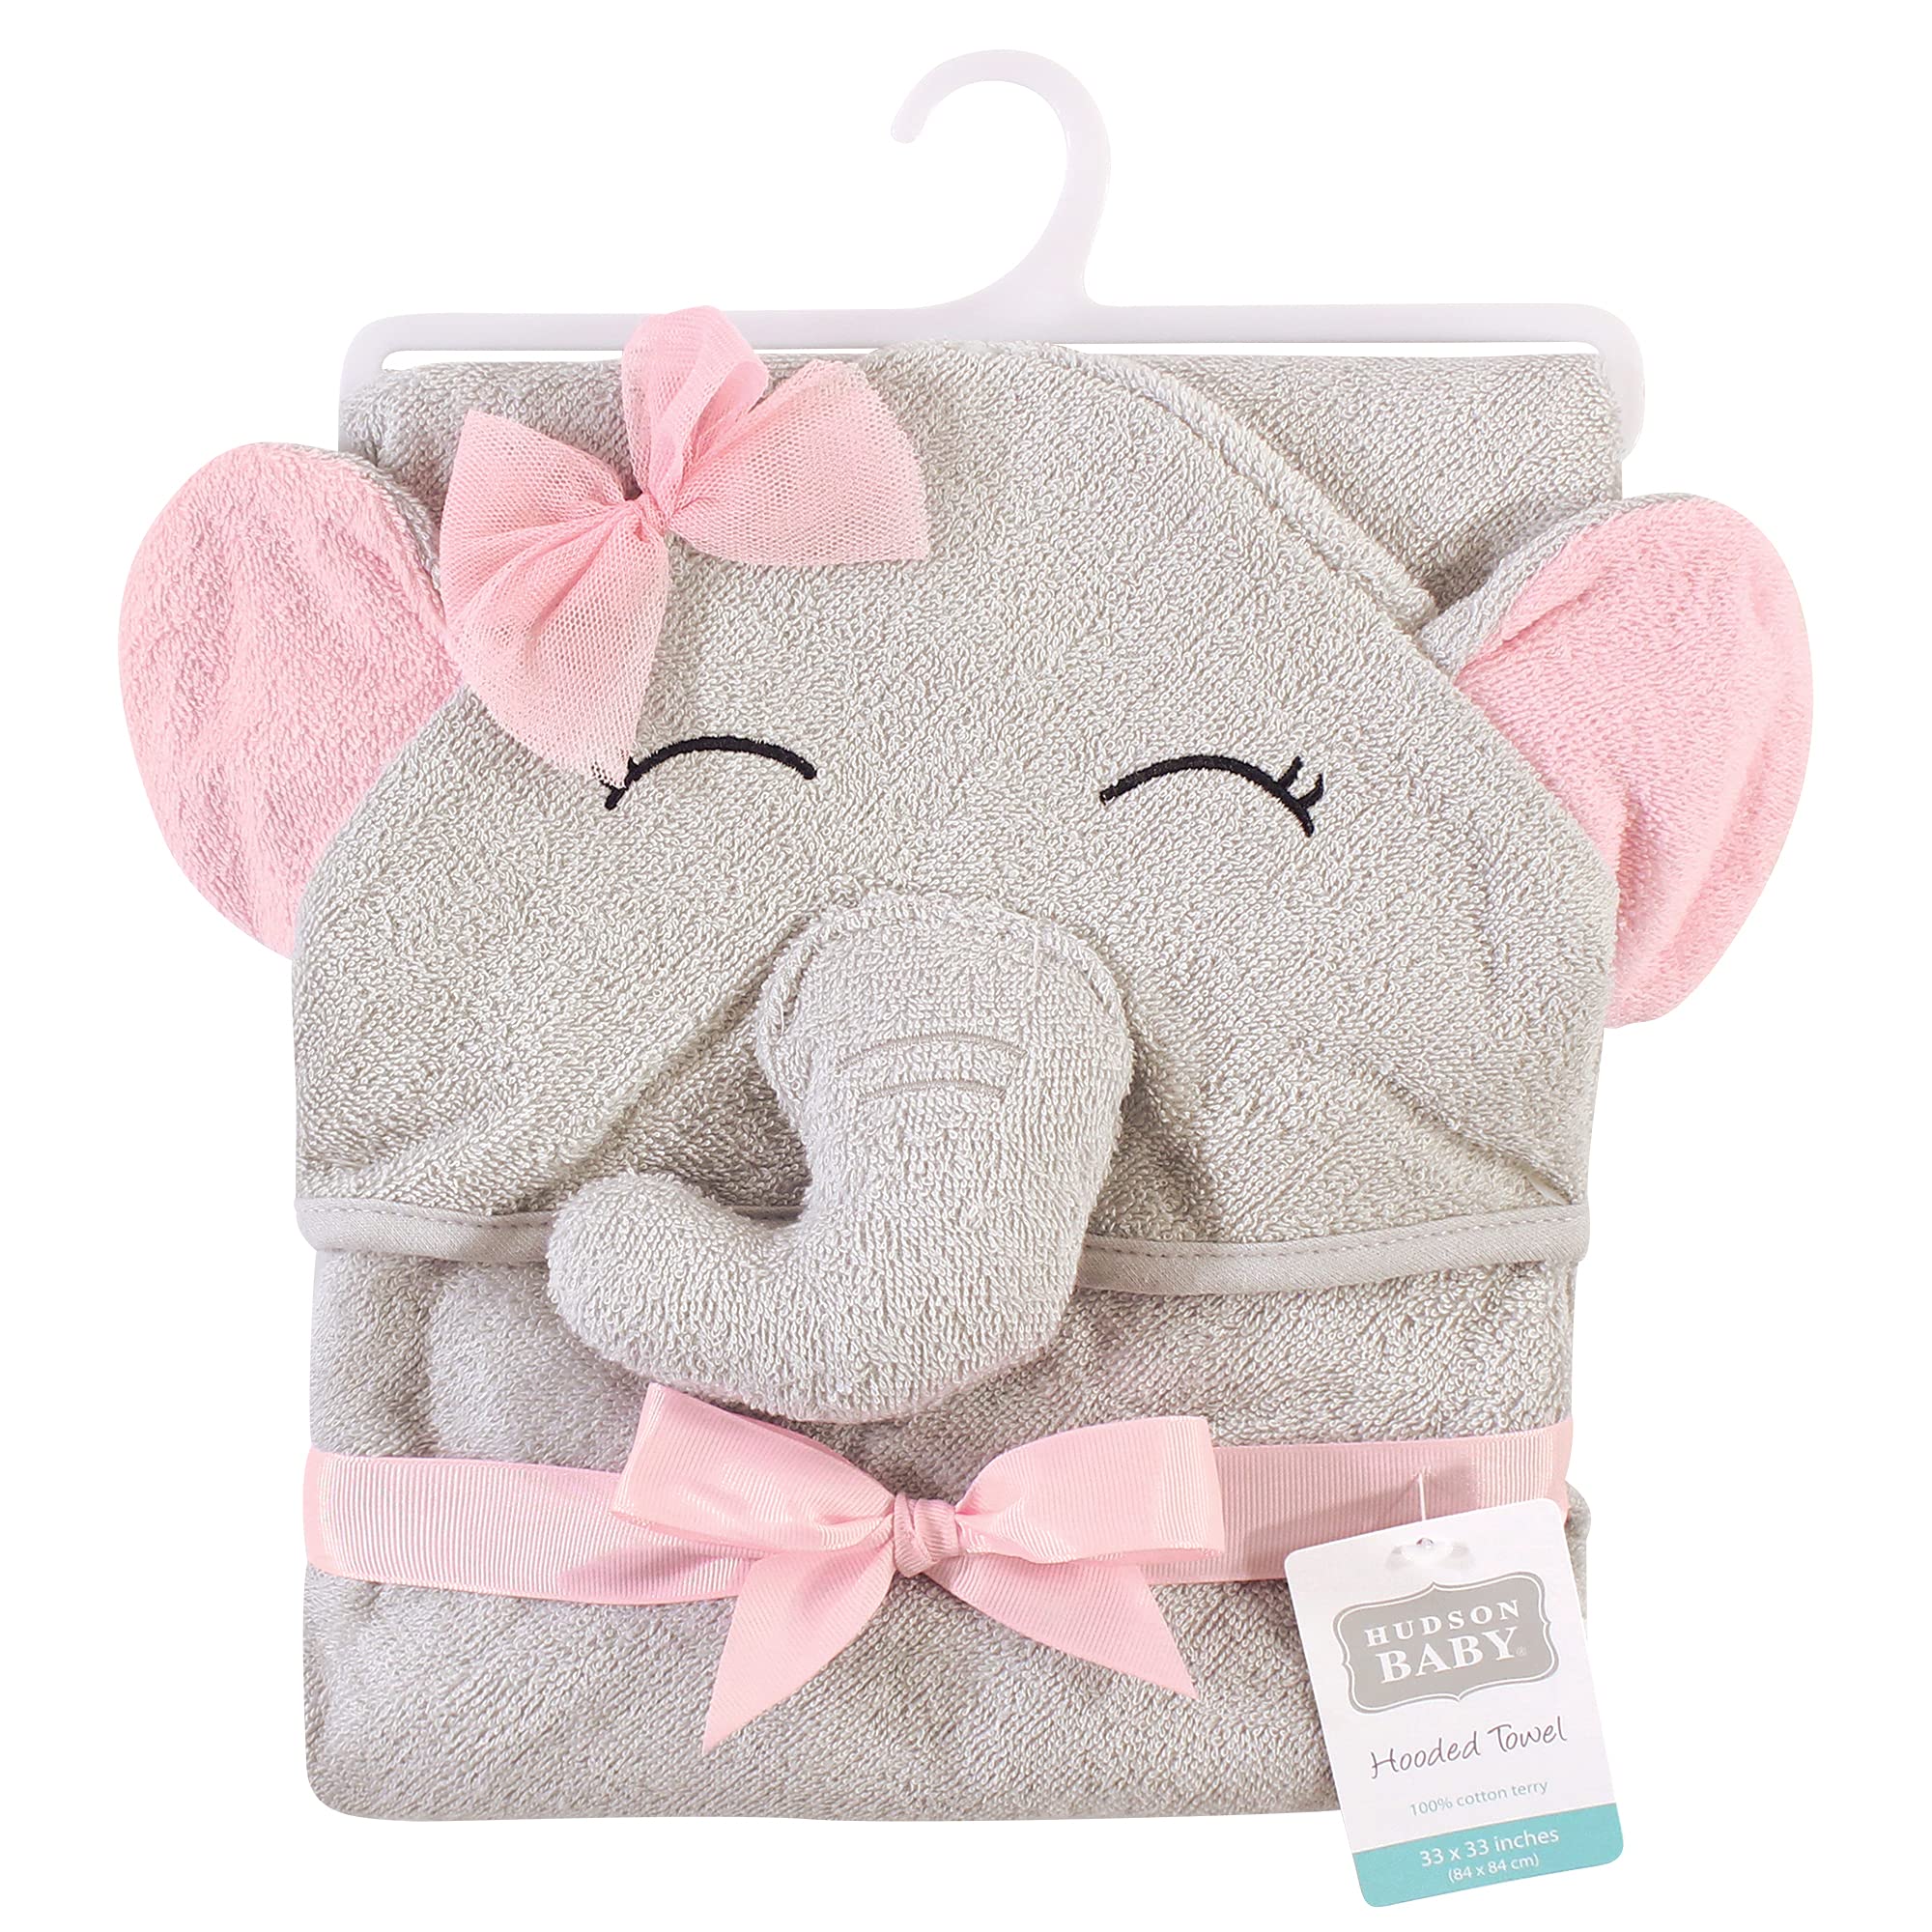 Hudson Baby Unisex Baby Cotton Animal Face Hooded Towel, Pretty Elephant, One Size